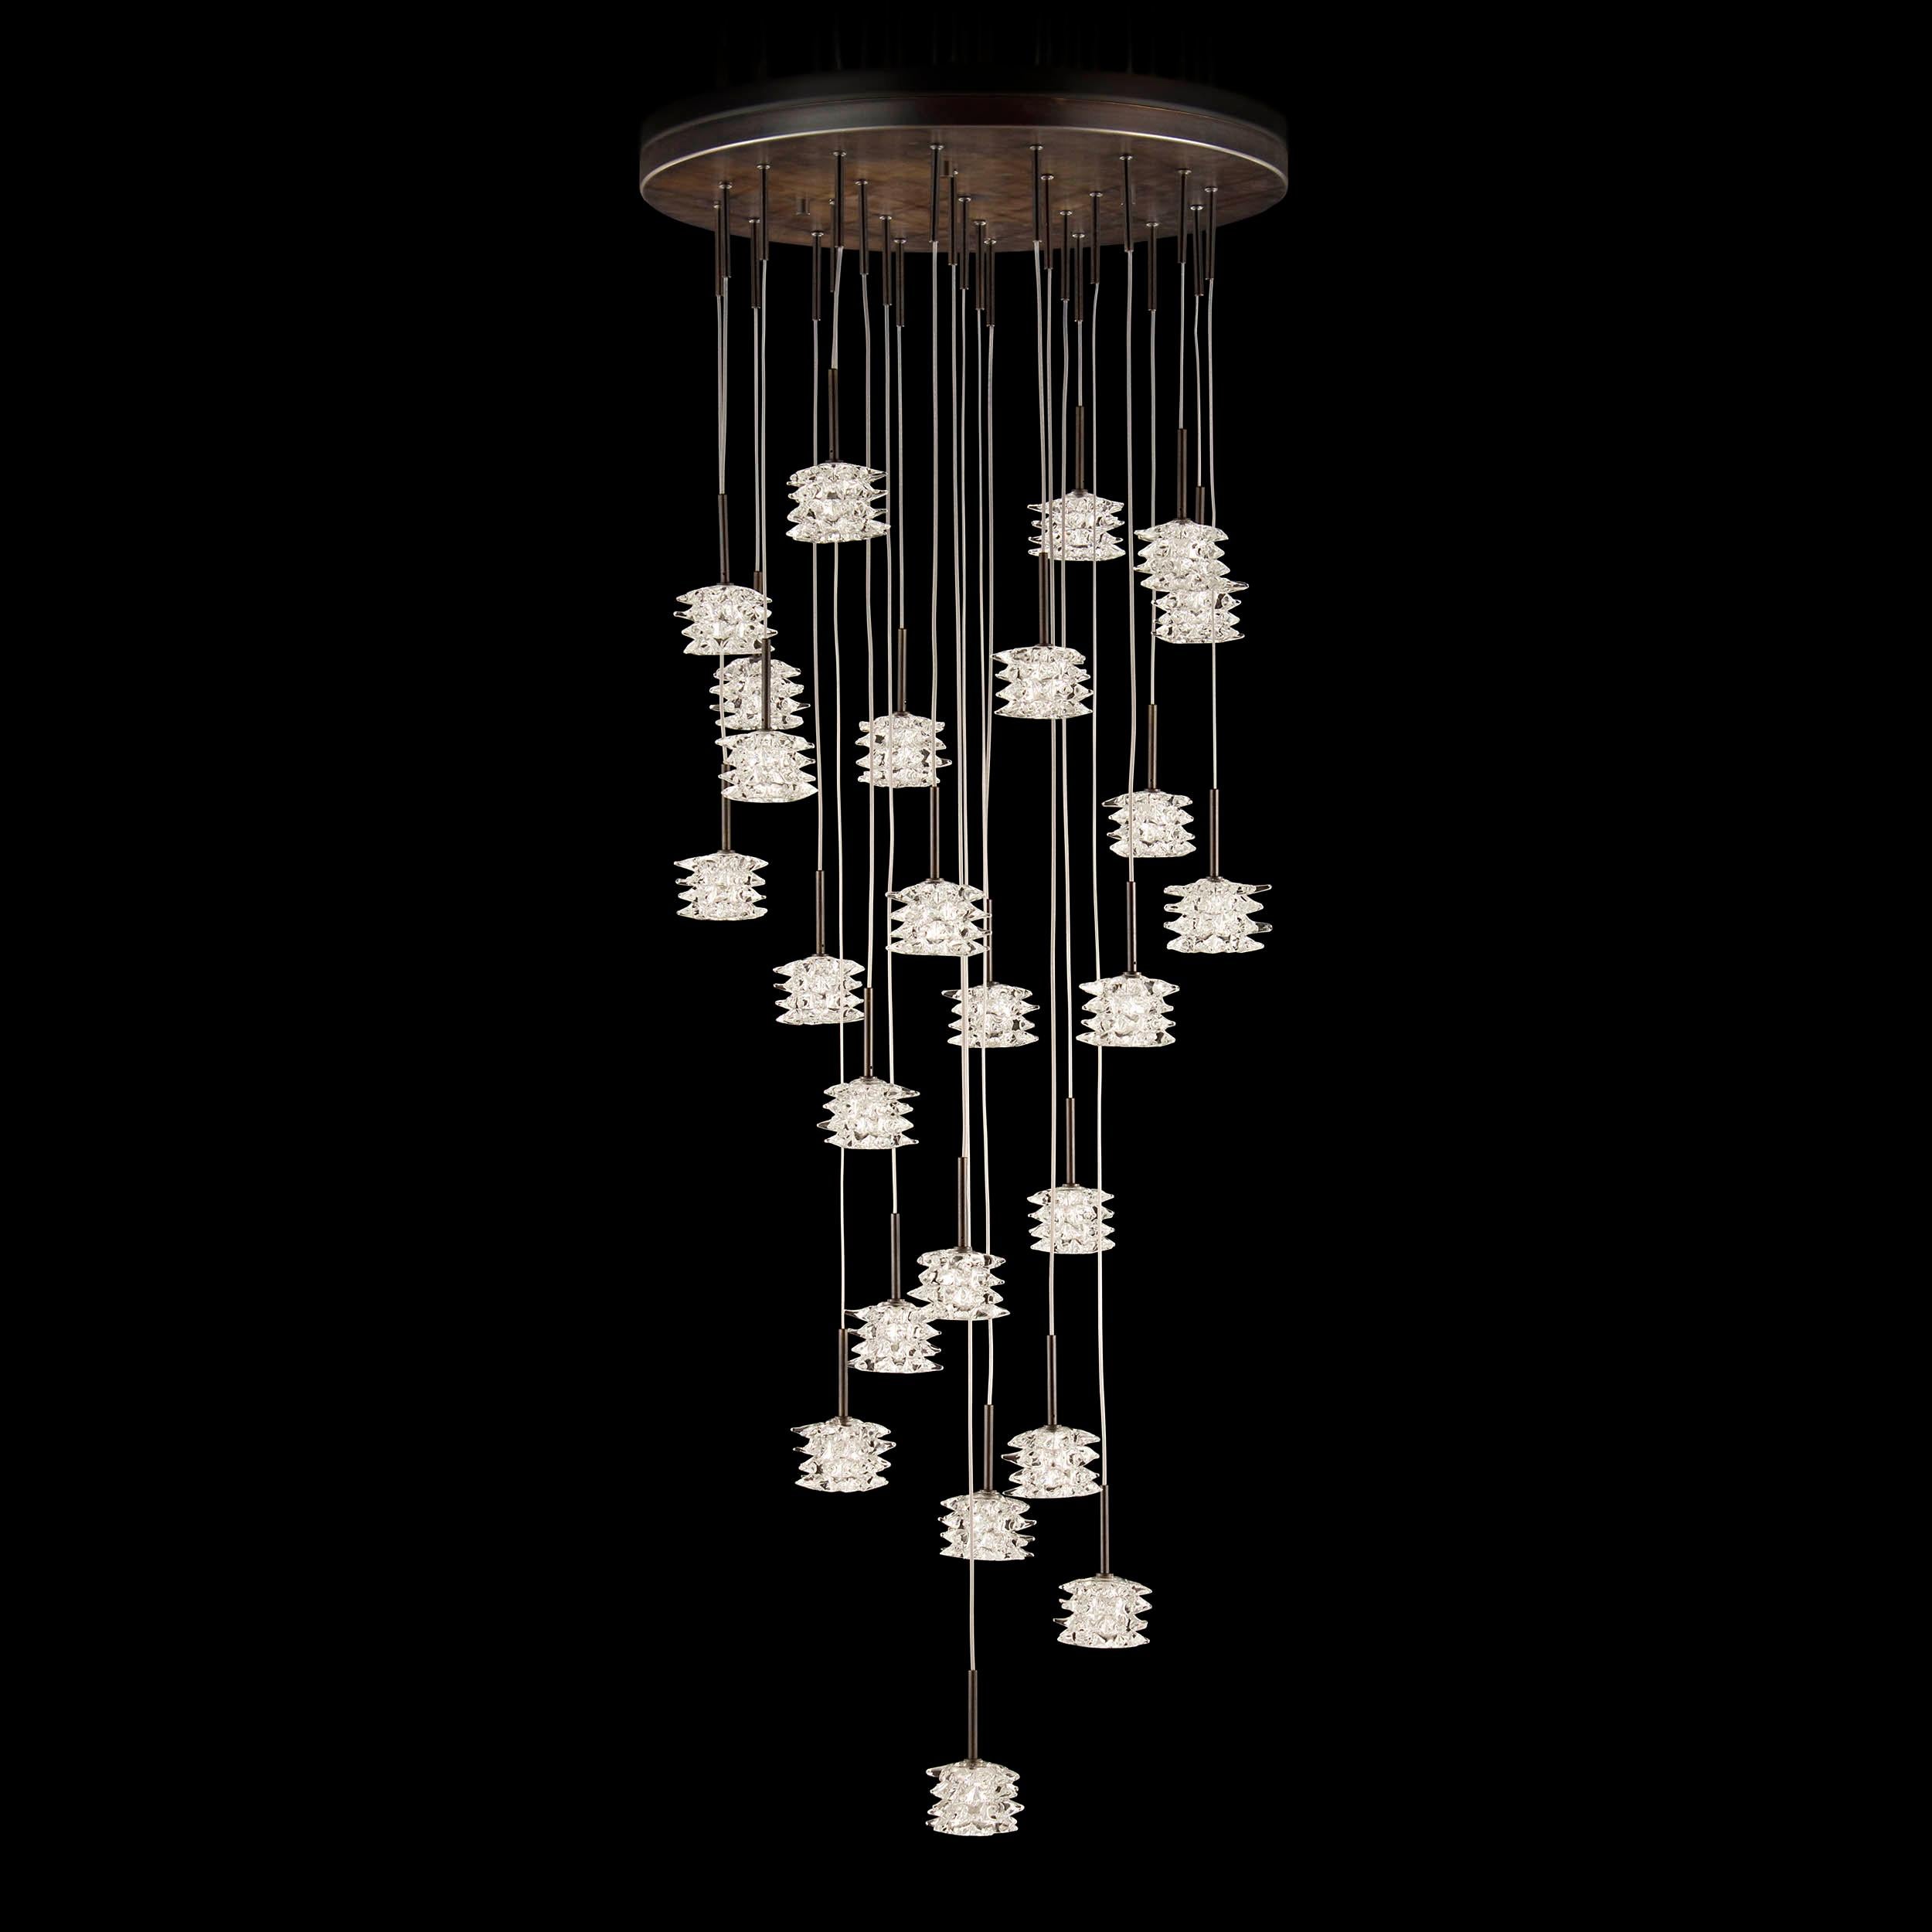 A precious lighting work, the suspension lamp Scintilla stands out for its elegance and refinement. The crystal glass elements are made using the “rostrato” technique, which was introduced by the great artist Ercole Barovier at the beginning of the